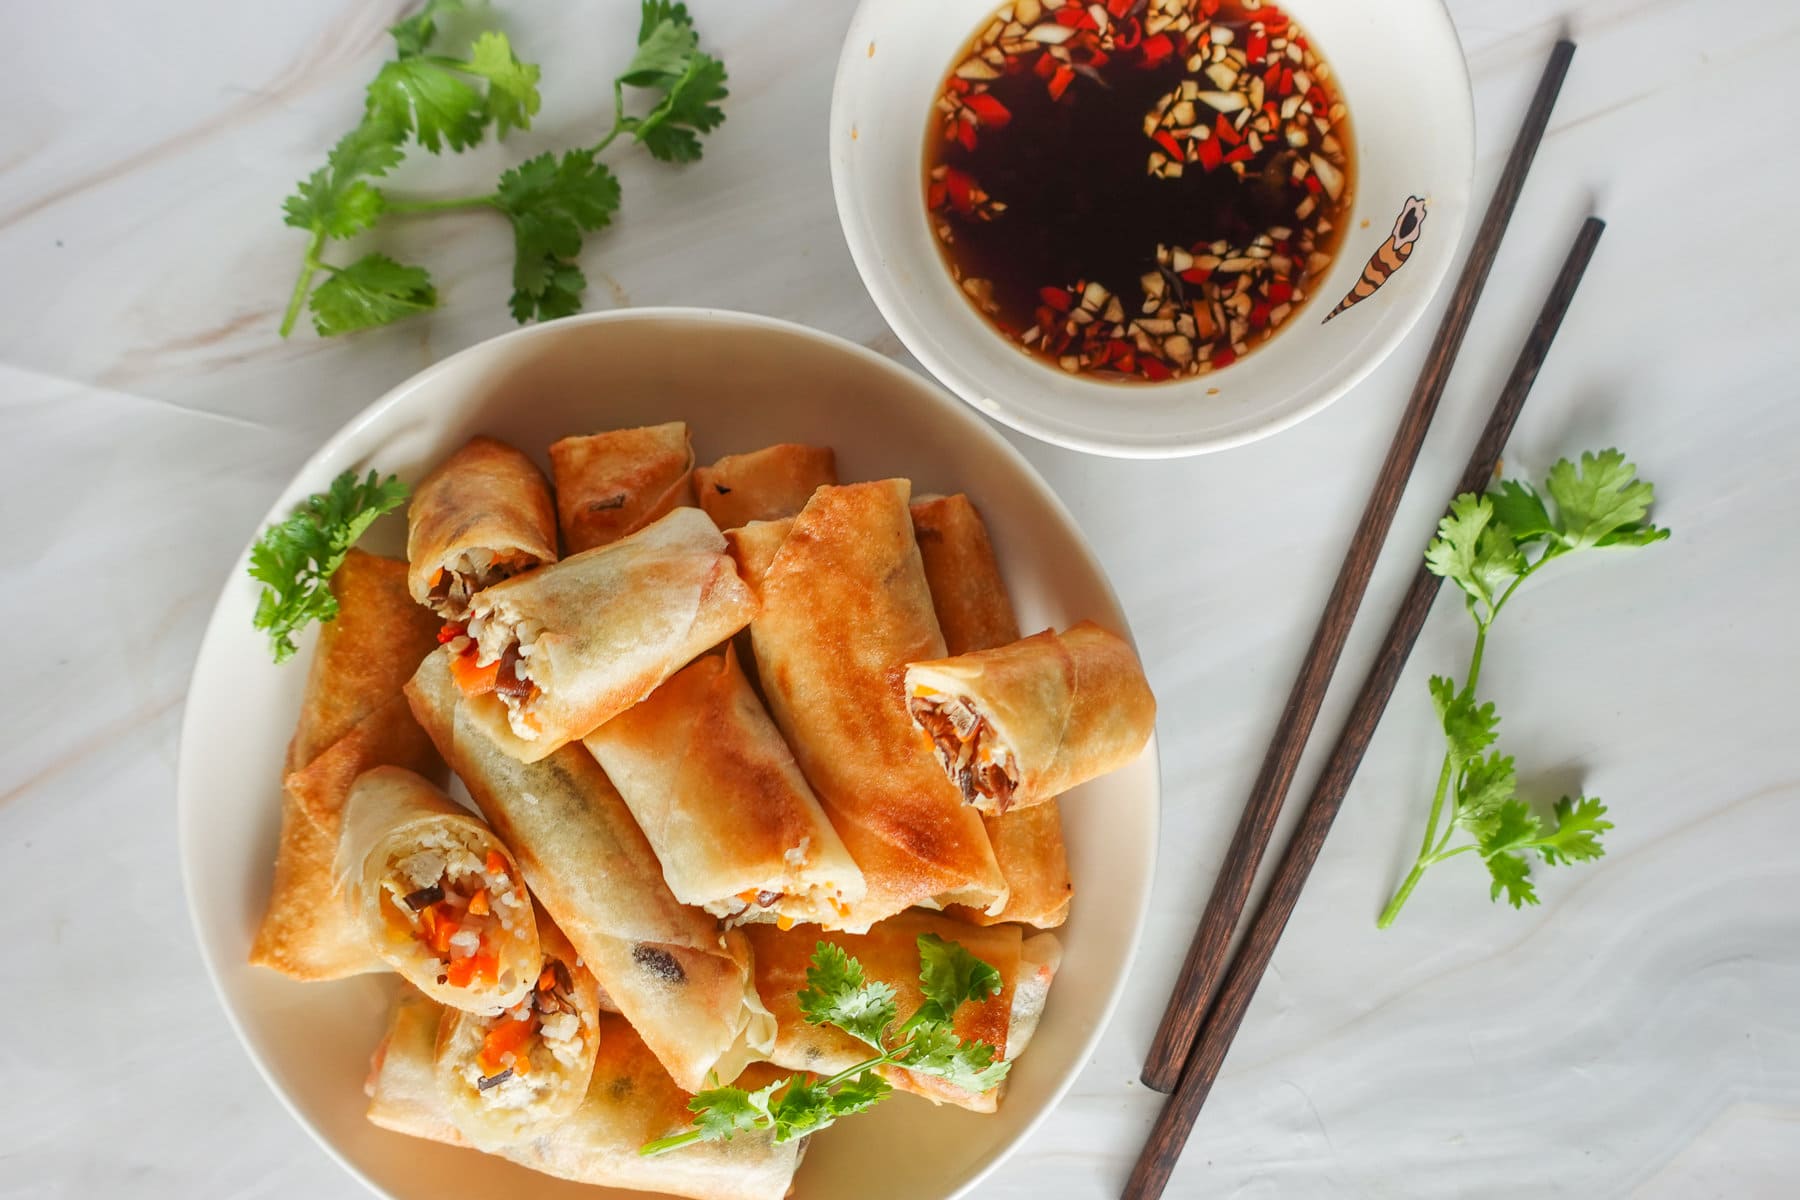 A plate of Vegan Egg Rolls paired with the flavorful dipping sauce